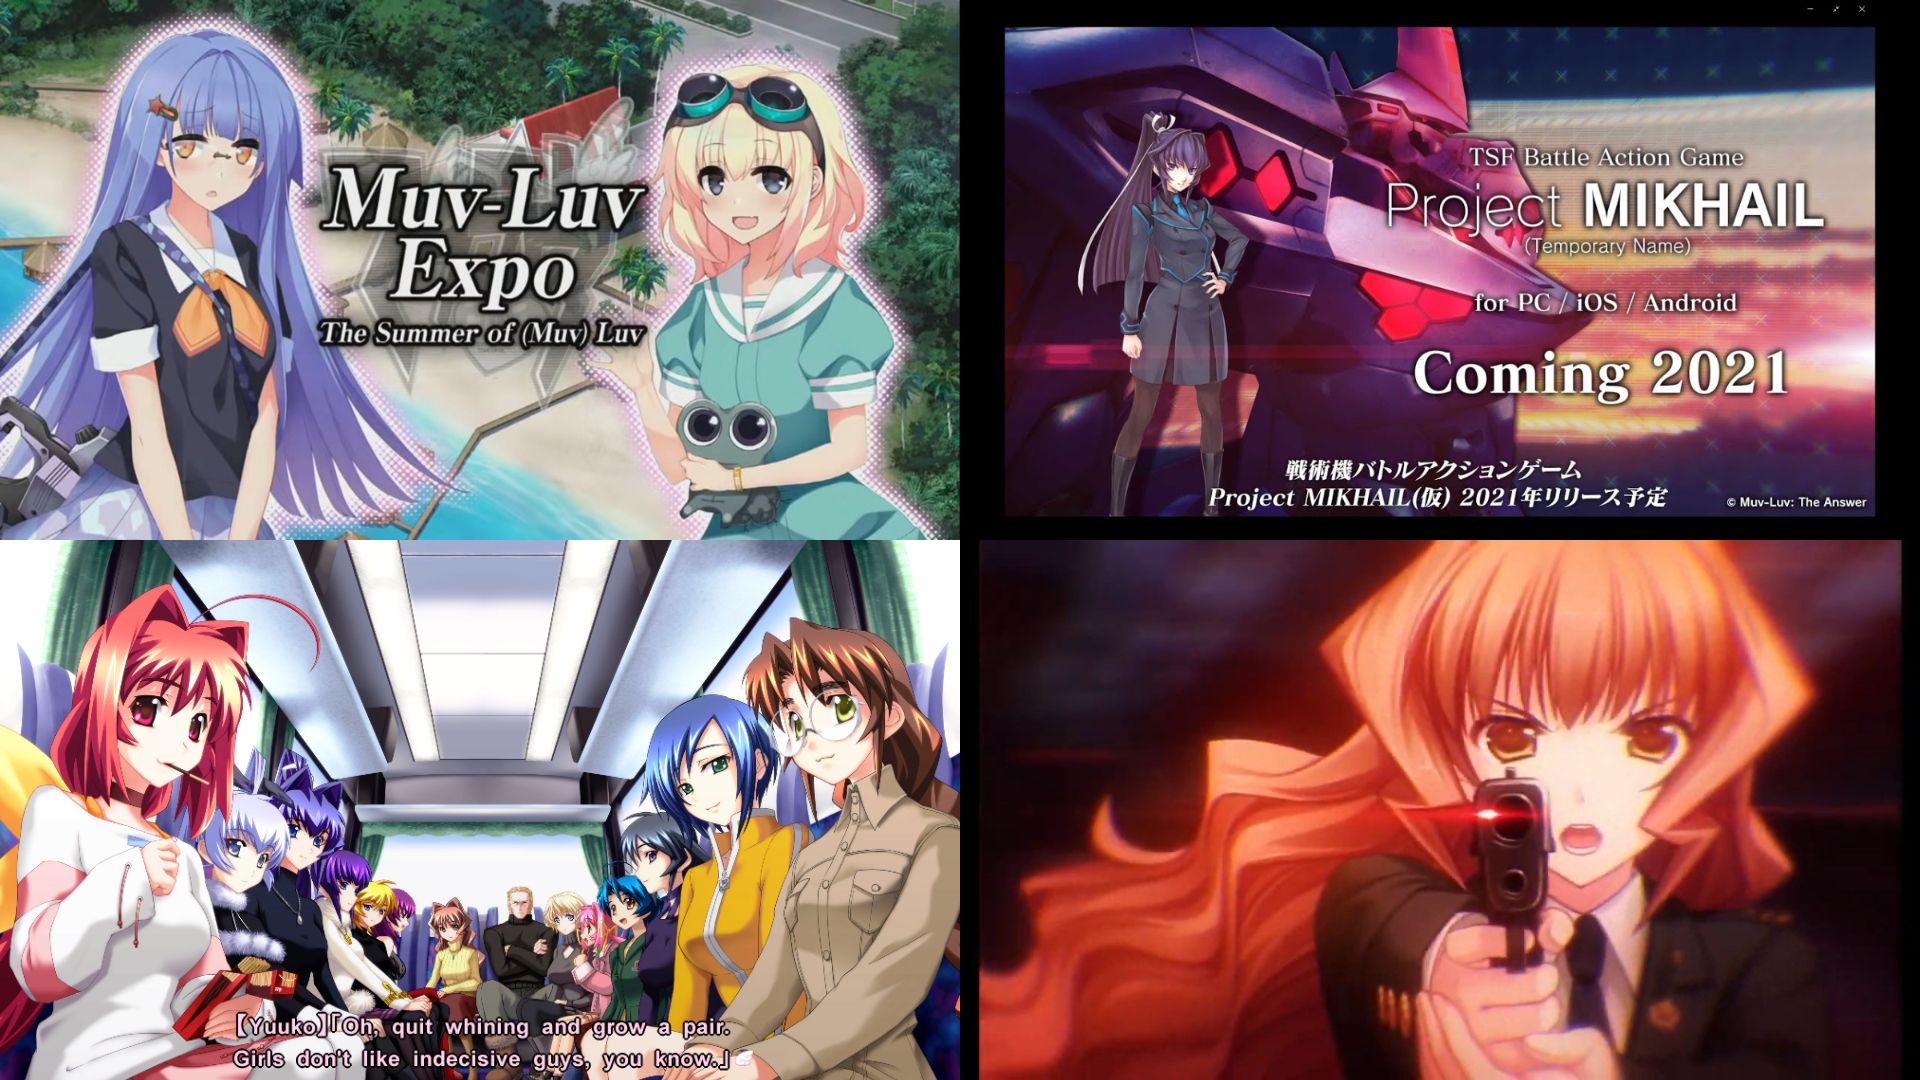 Muv-Luv Expo The Summer of (muv) luv feature